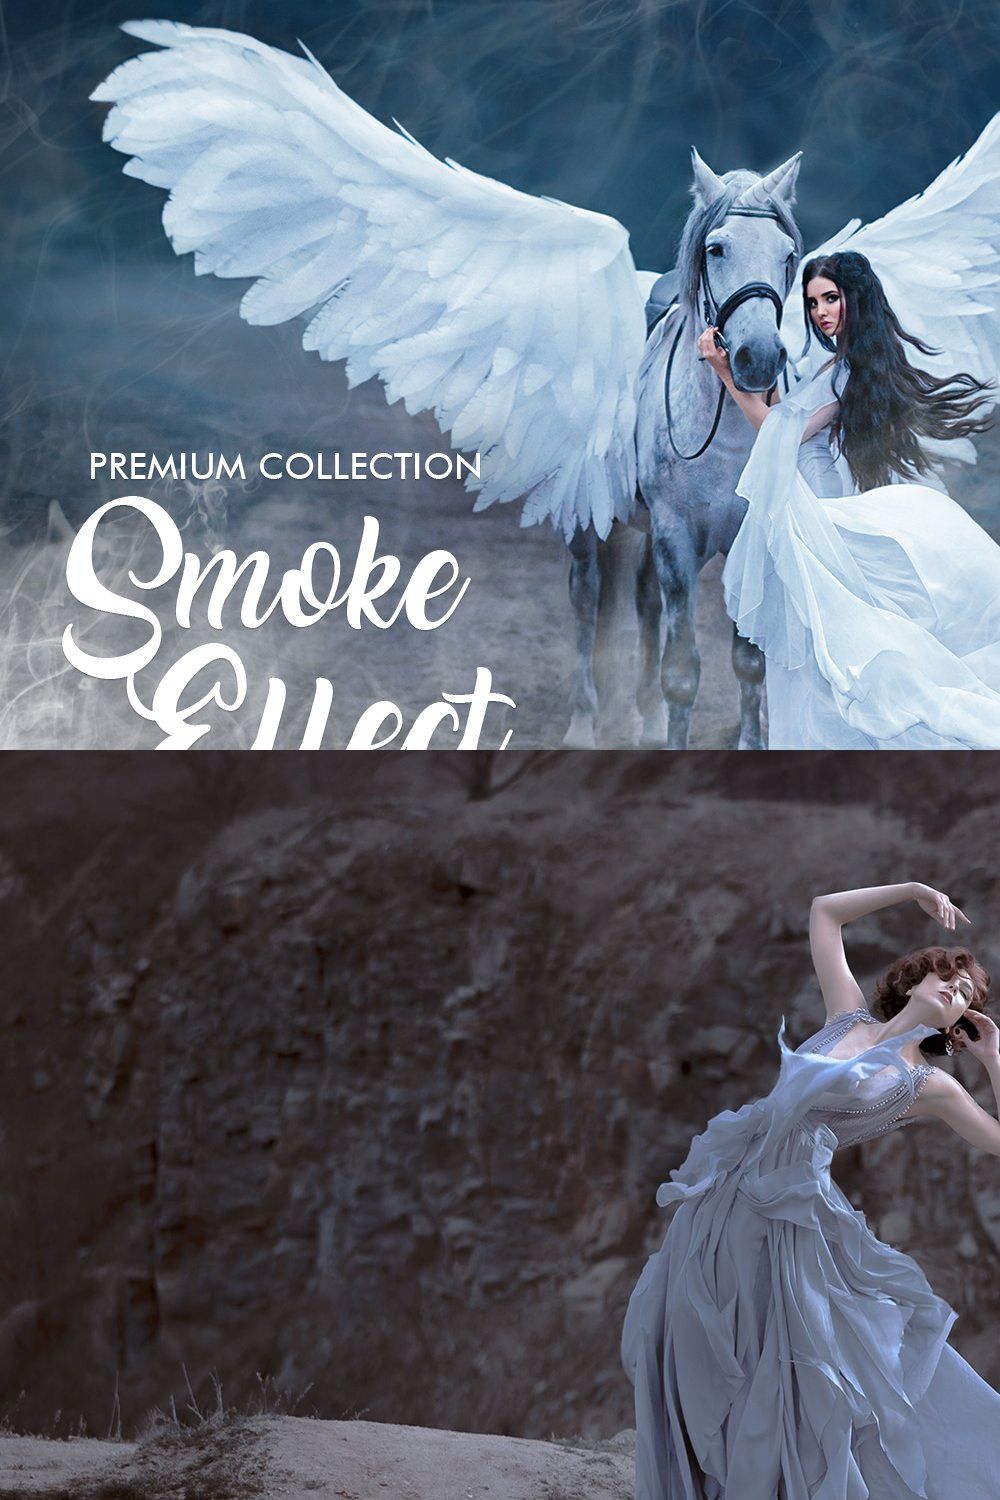 Smoke effect Photoshop Overlays pinterest preview image.